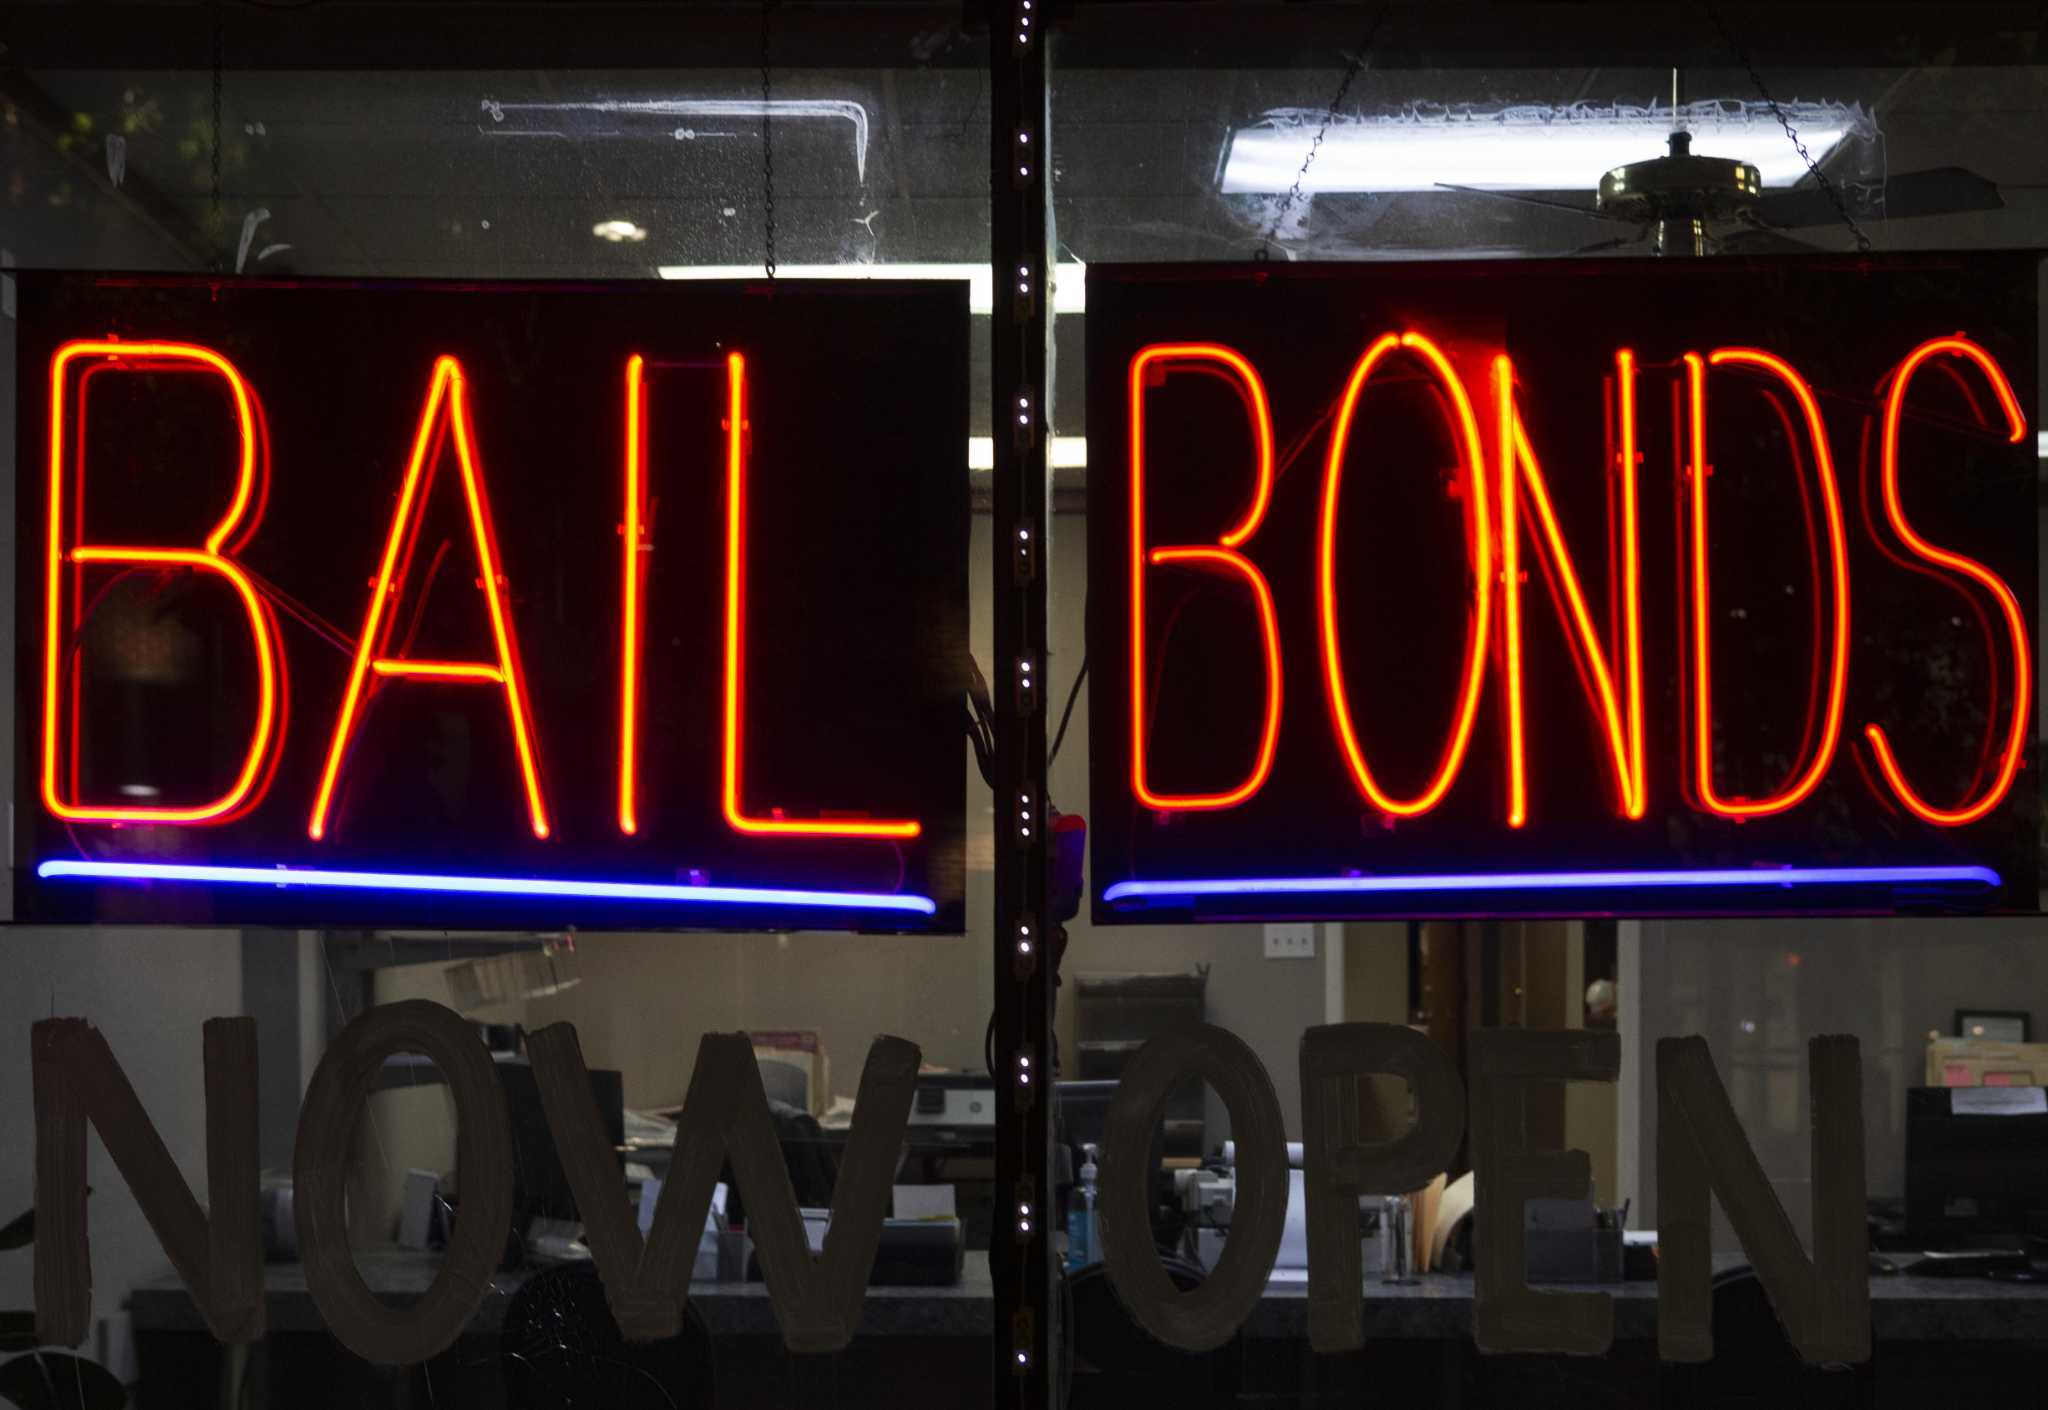 How Much Does A $10,000 Bail Bond Cost?